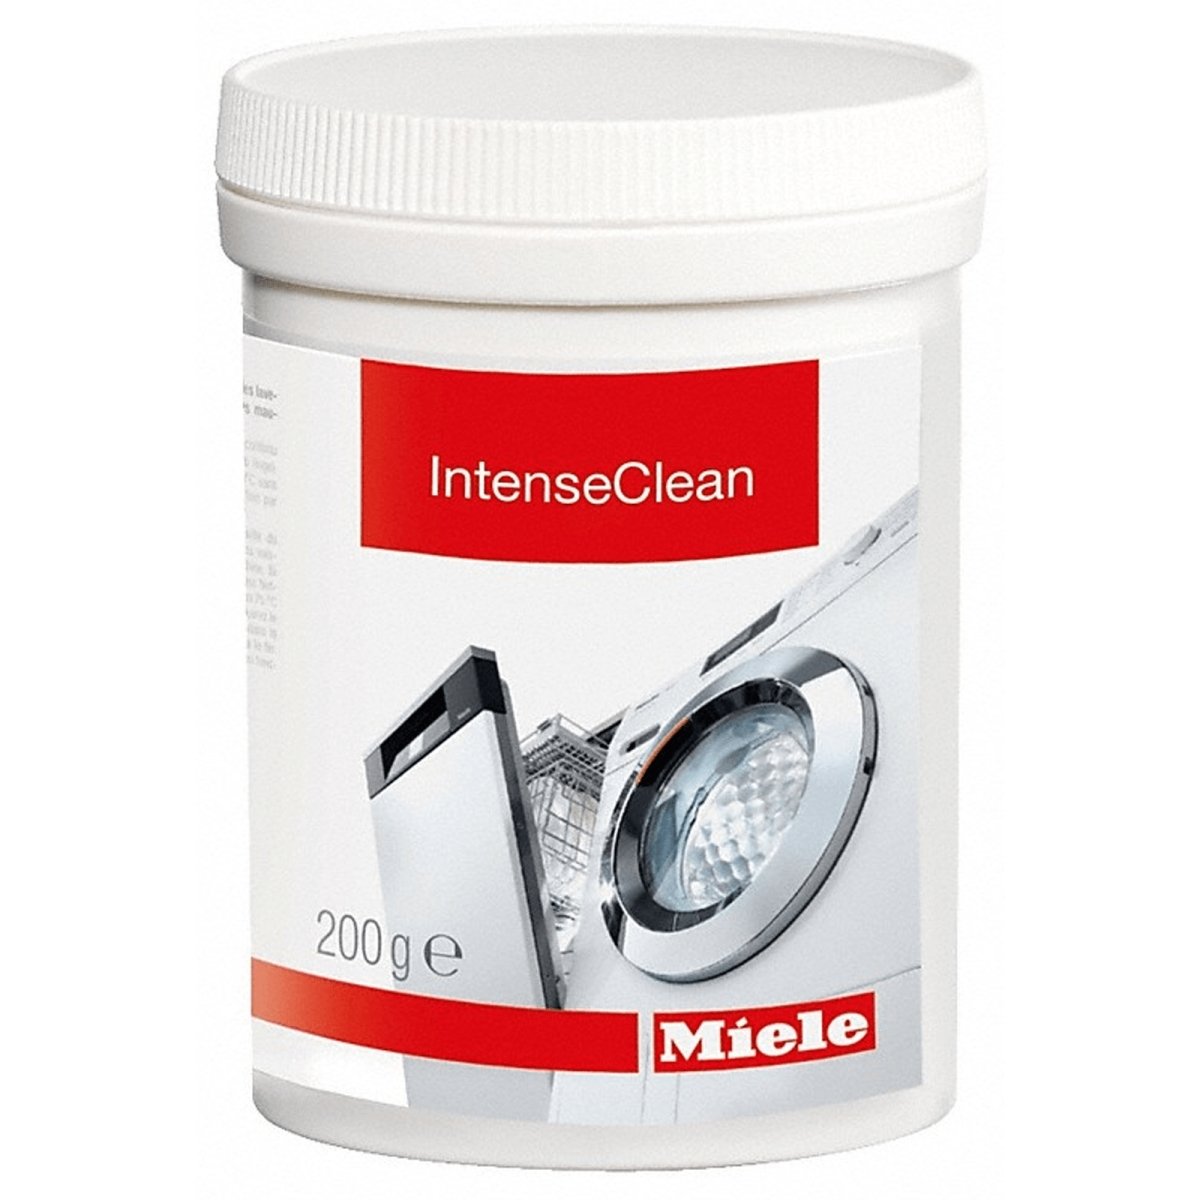 Miele 10717070 IntenseClean Dishwasher And Washing Machine Cleaner | Atlantic Electrics